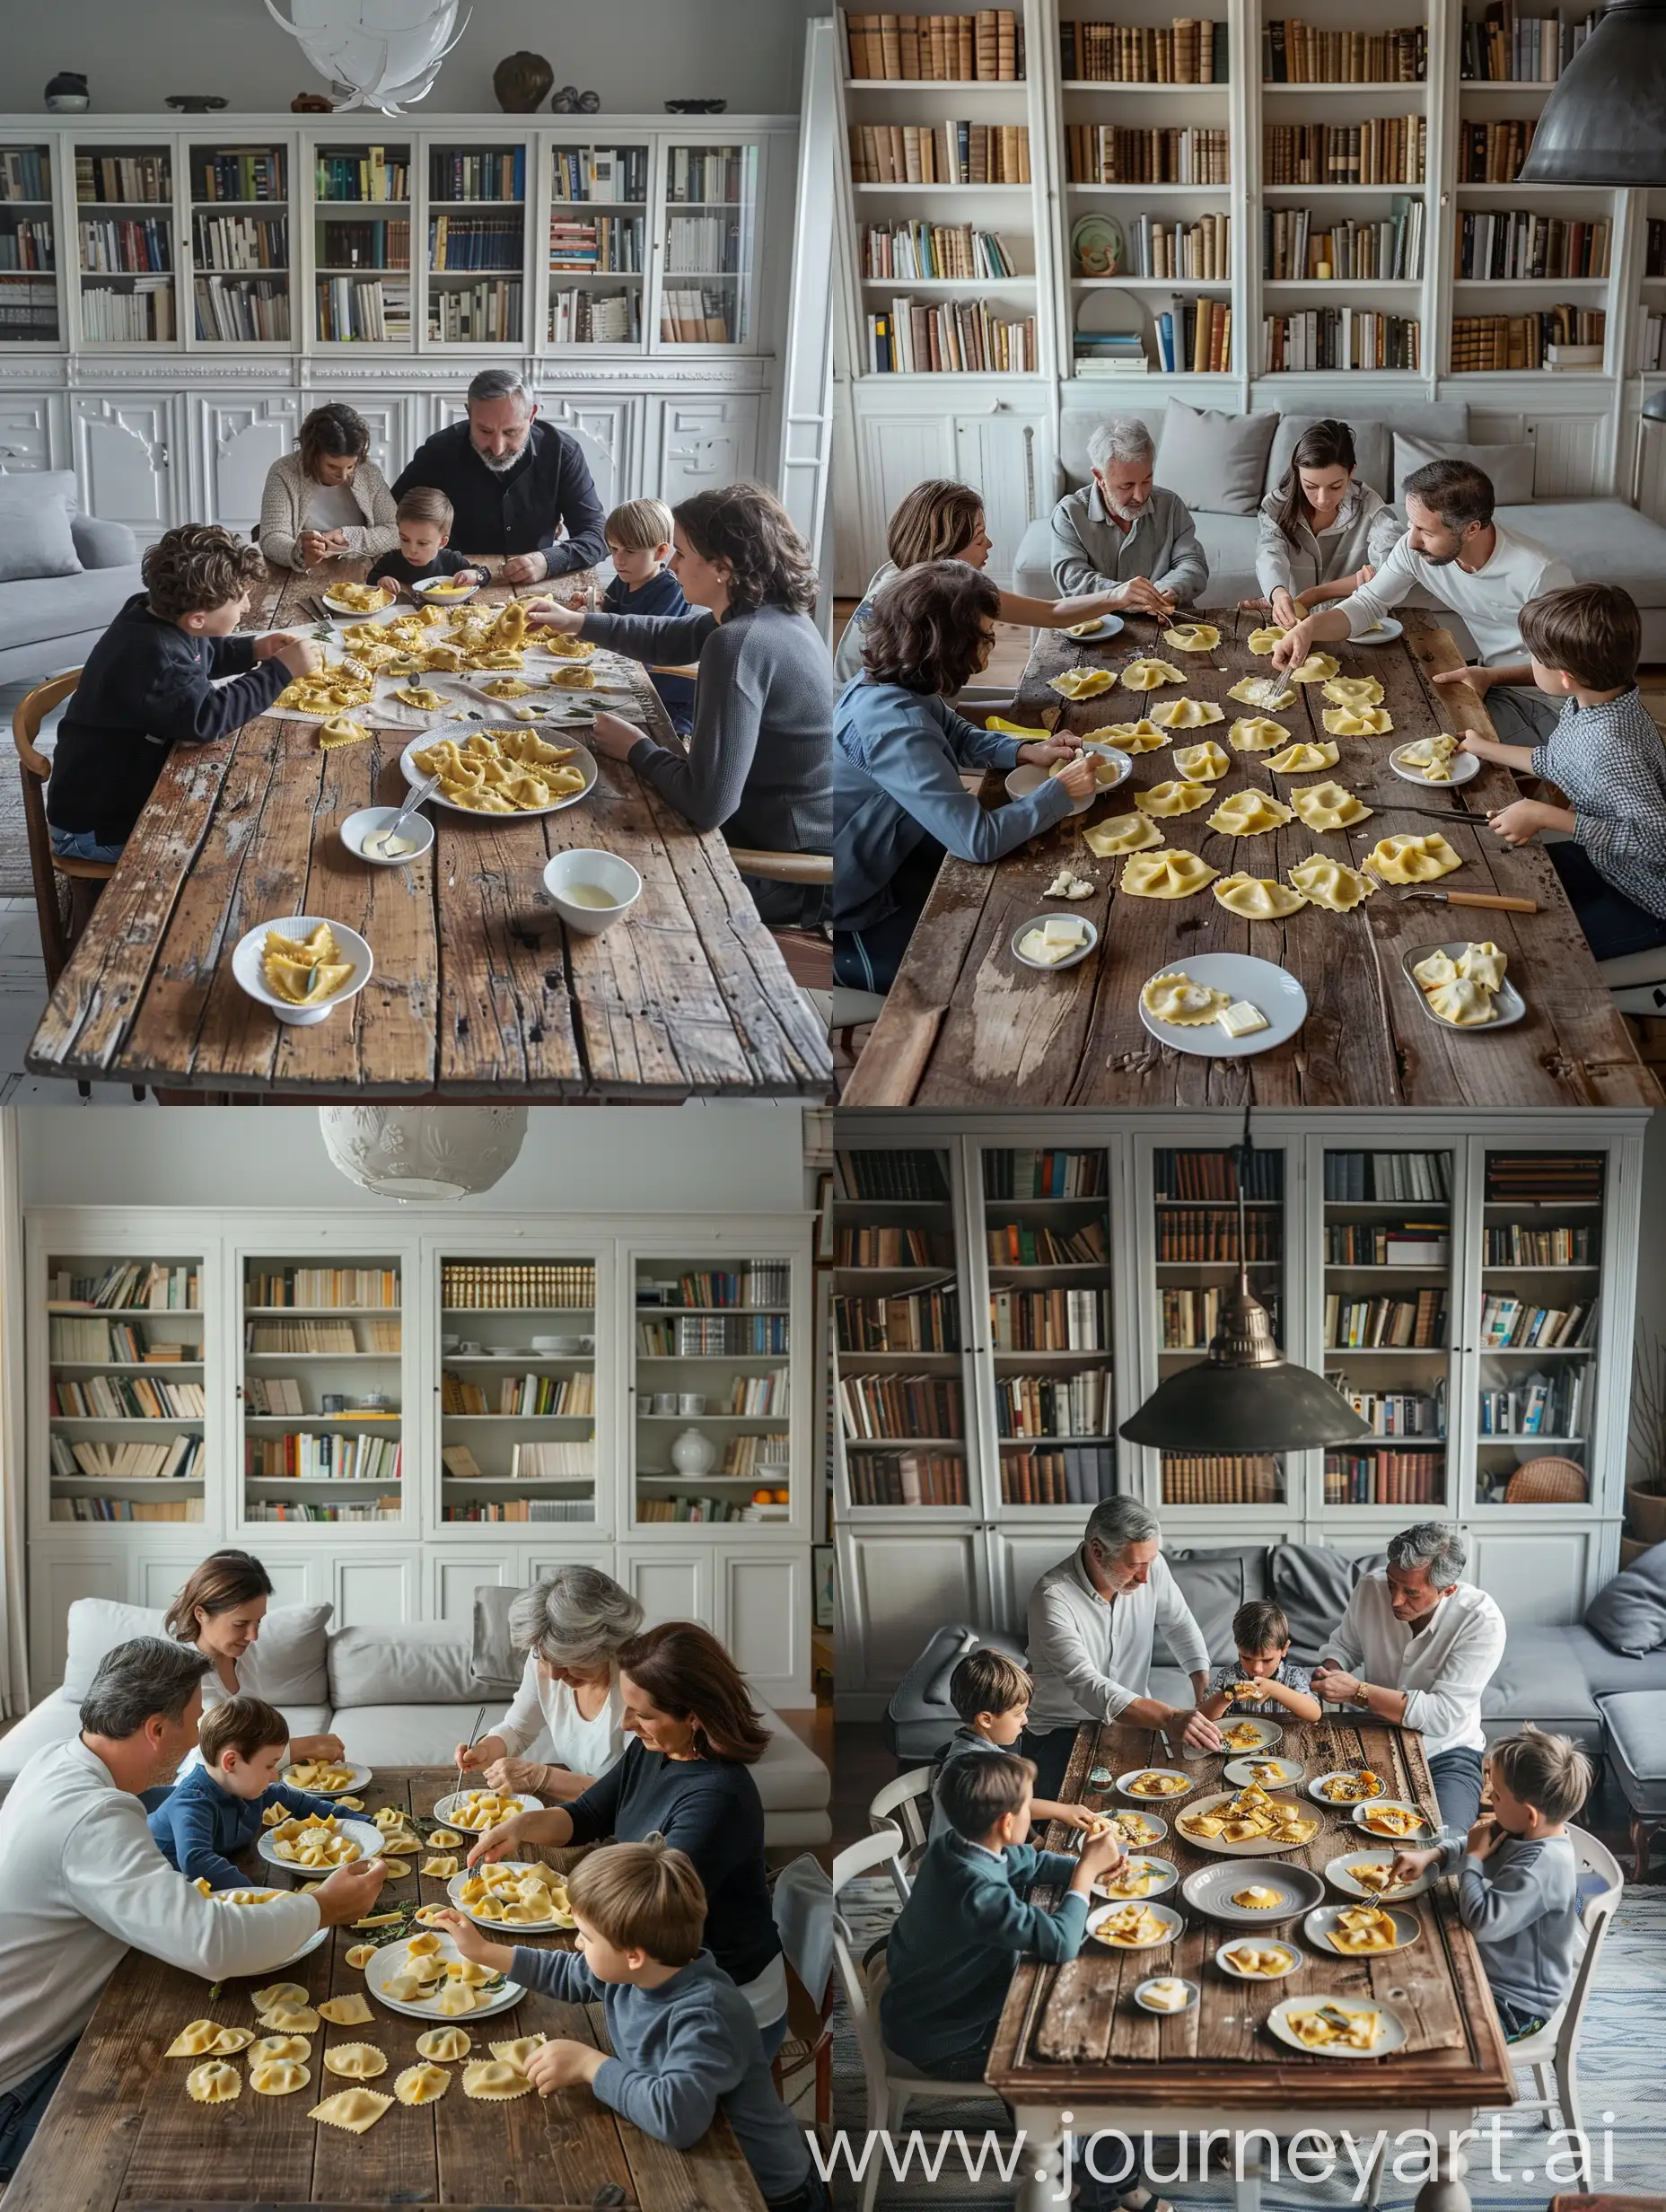 Multigenerational-Family-Dinner-with-Stuffed-Ravioli-Warm-Gathering-Around-Wooden-Table